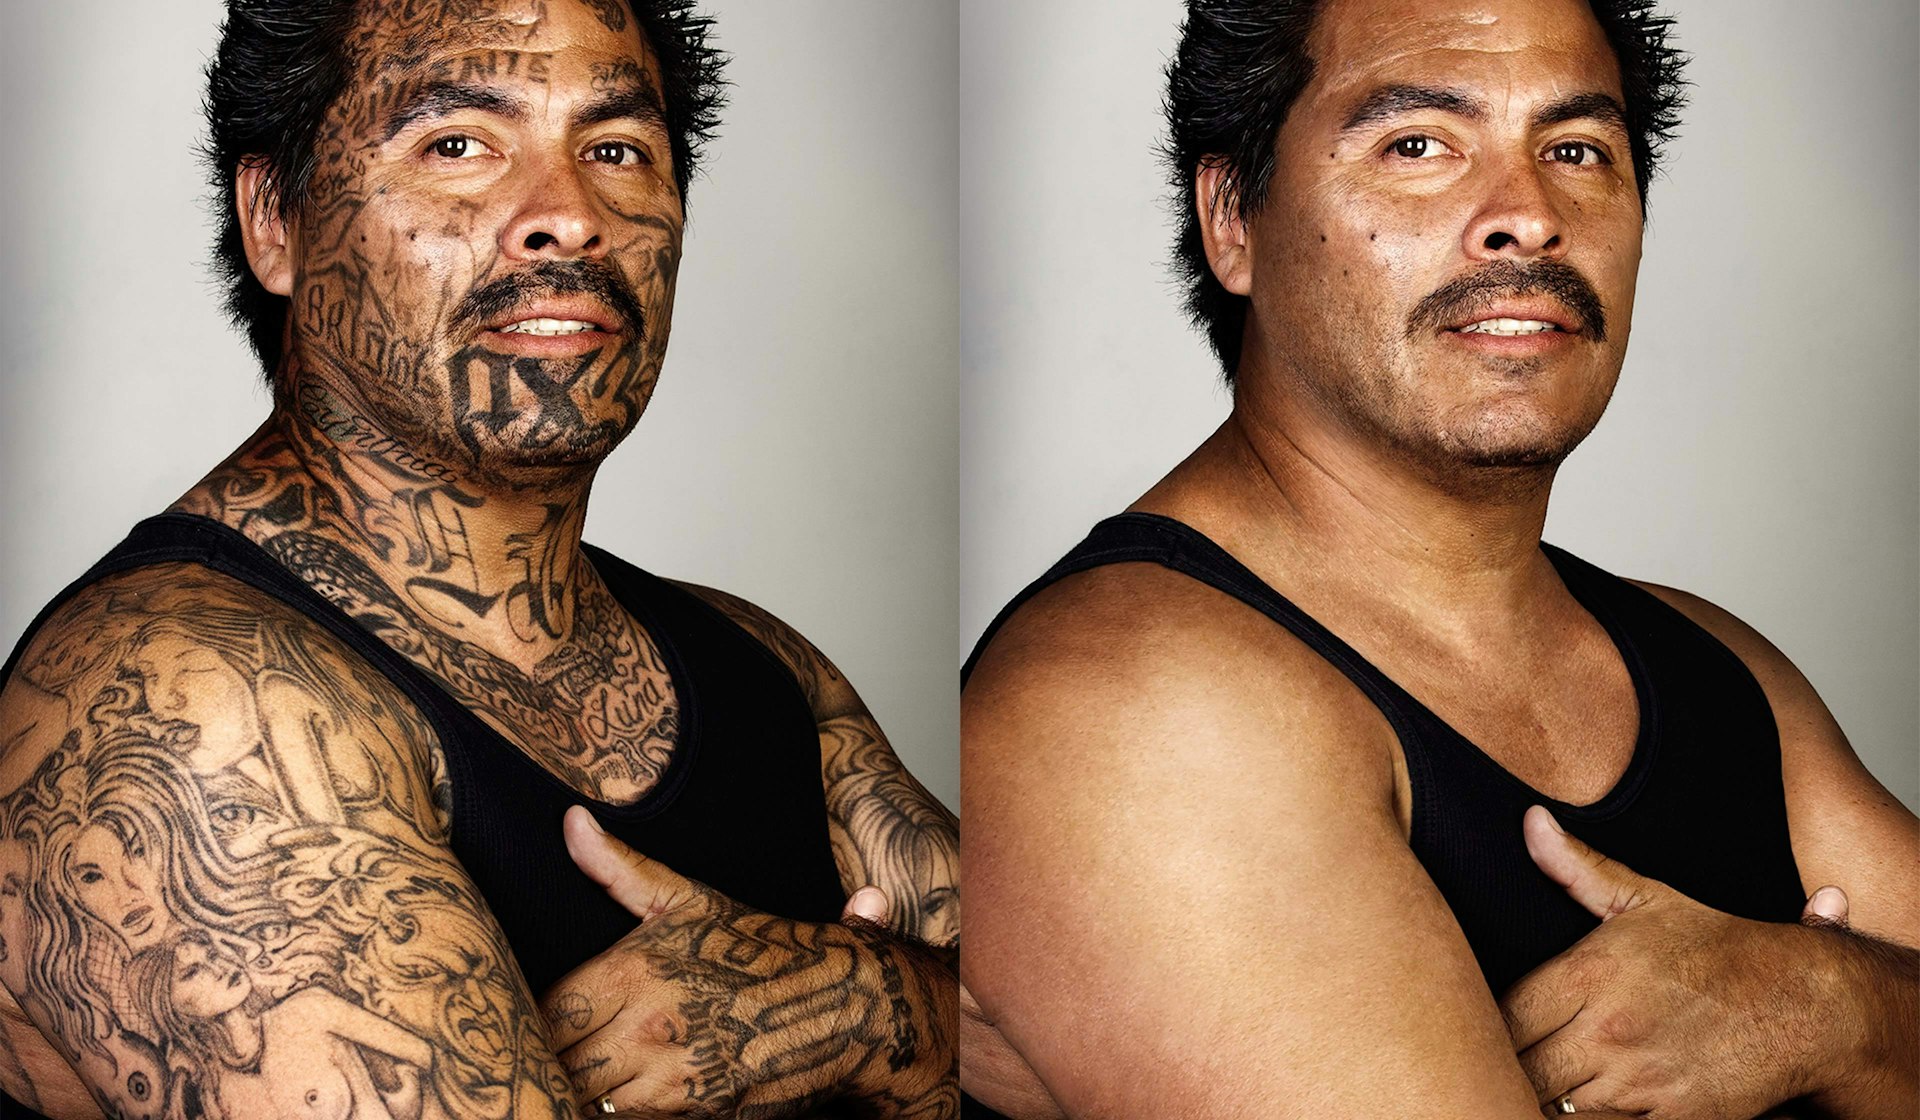 The photographer removing gang members' tattoos to help us see past the ink